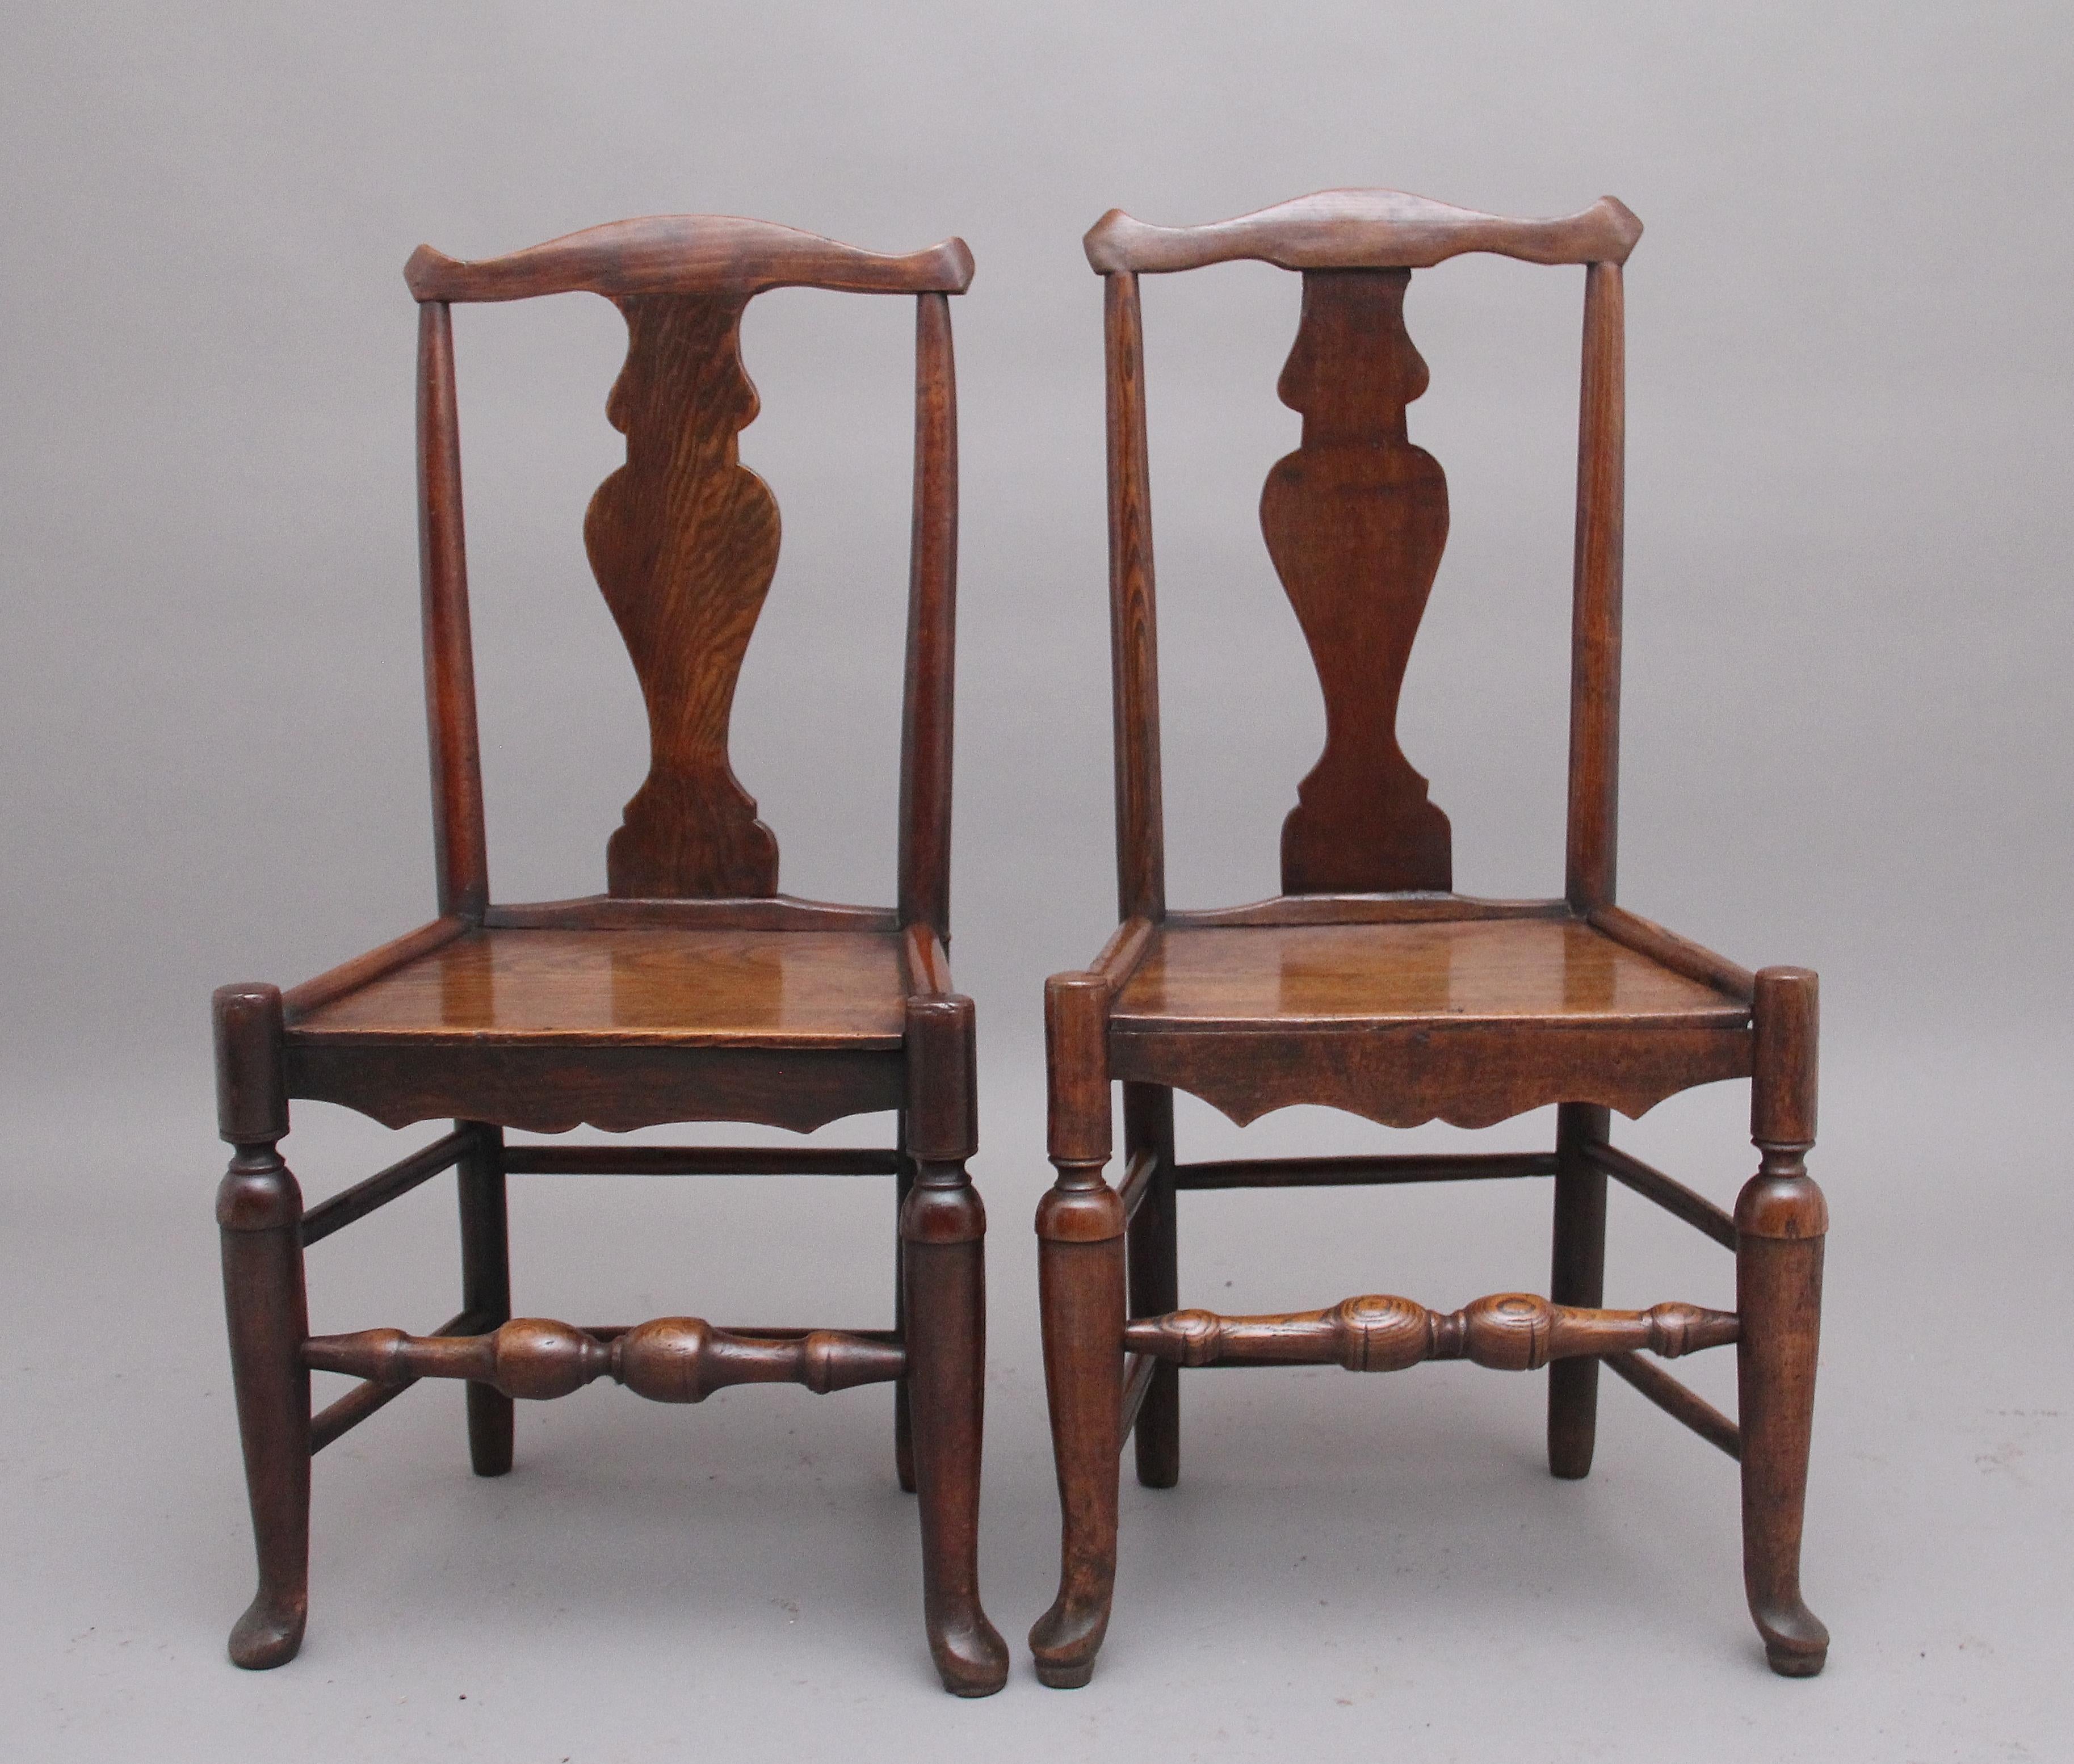 A pair of mid 18th Century elm side chairs from the Georgian period, having a shaped rail above a decorative shaped splat with turned side supports, wonderfully figured plank seat with a shaped apron, raised on turned legs united with side, back and